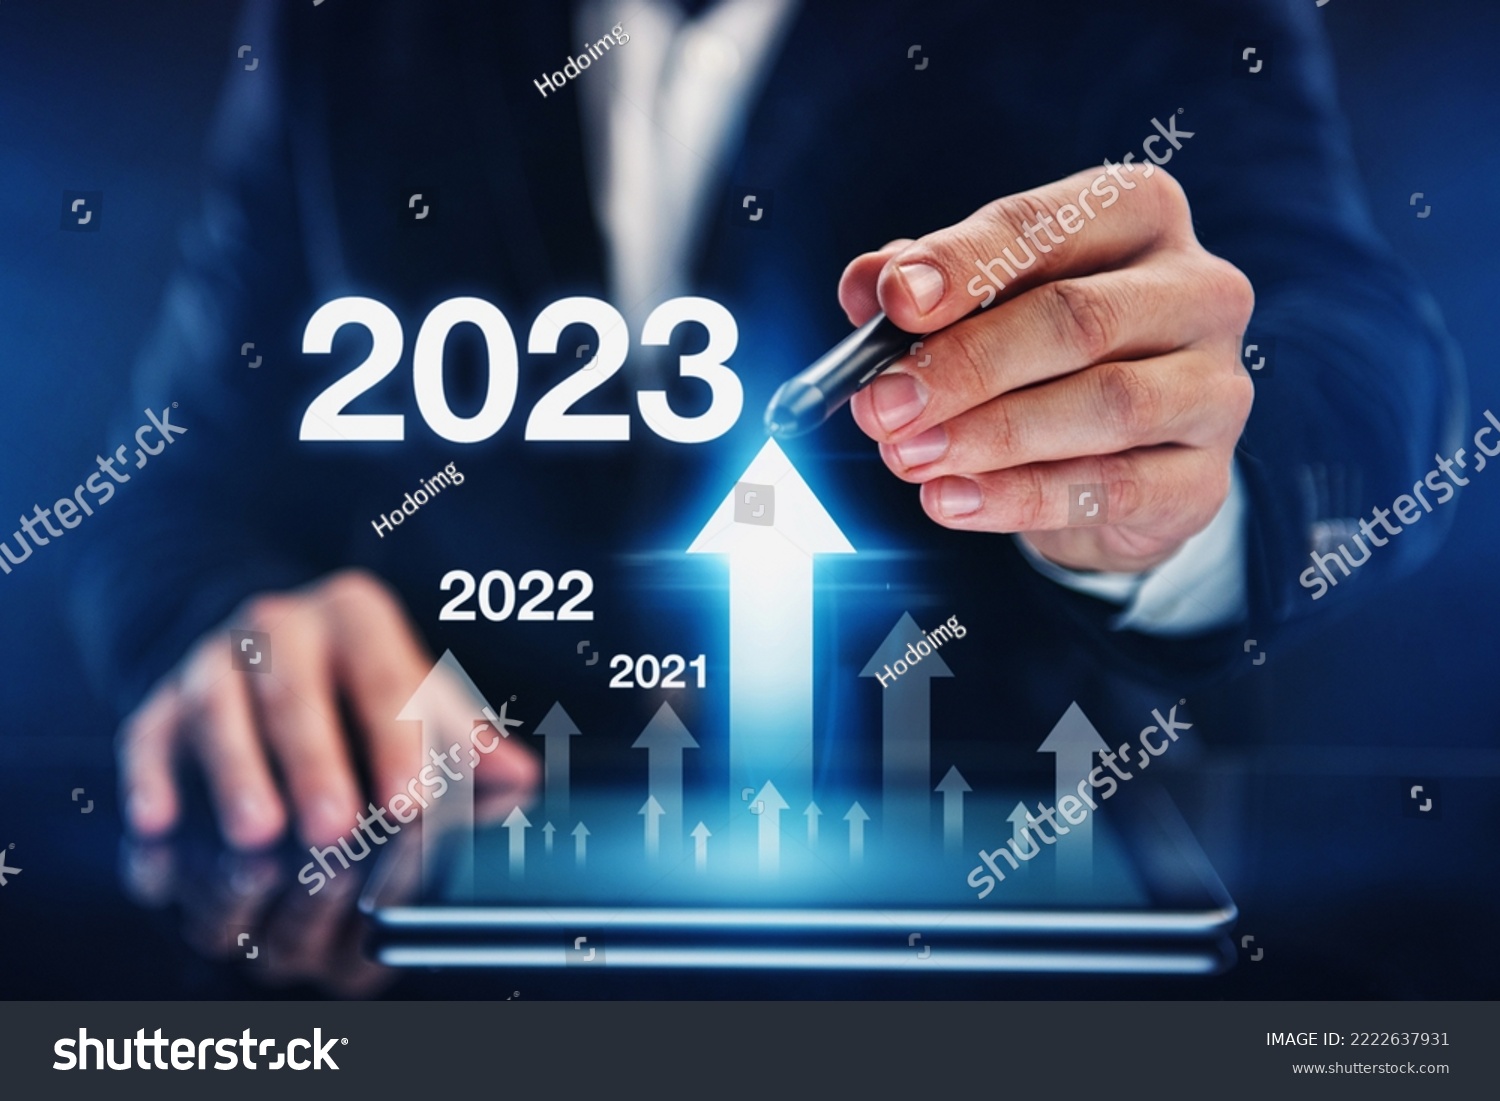 growth of economic indicators in 2023. Concept of business development in the new year #2222637931